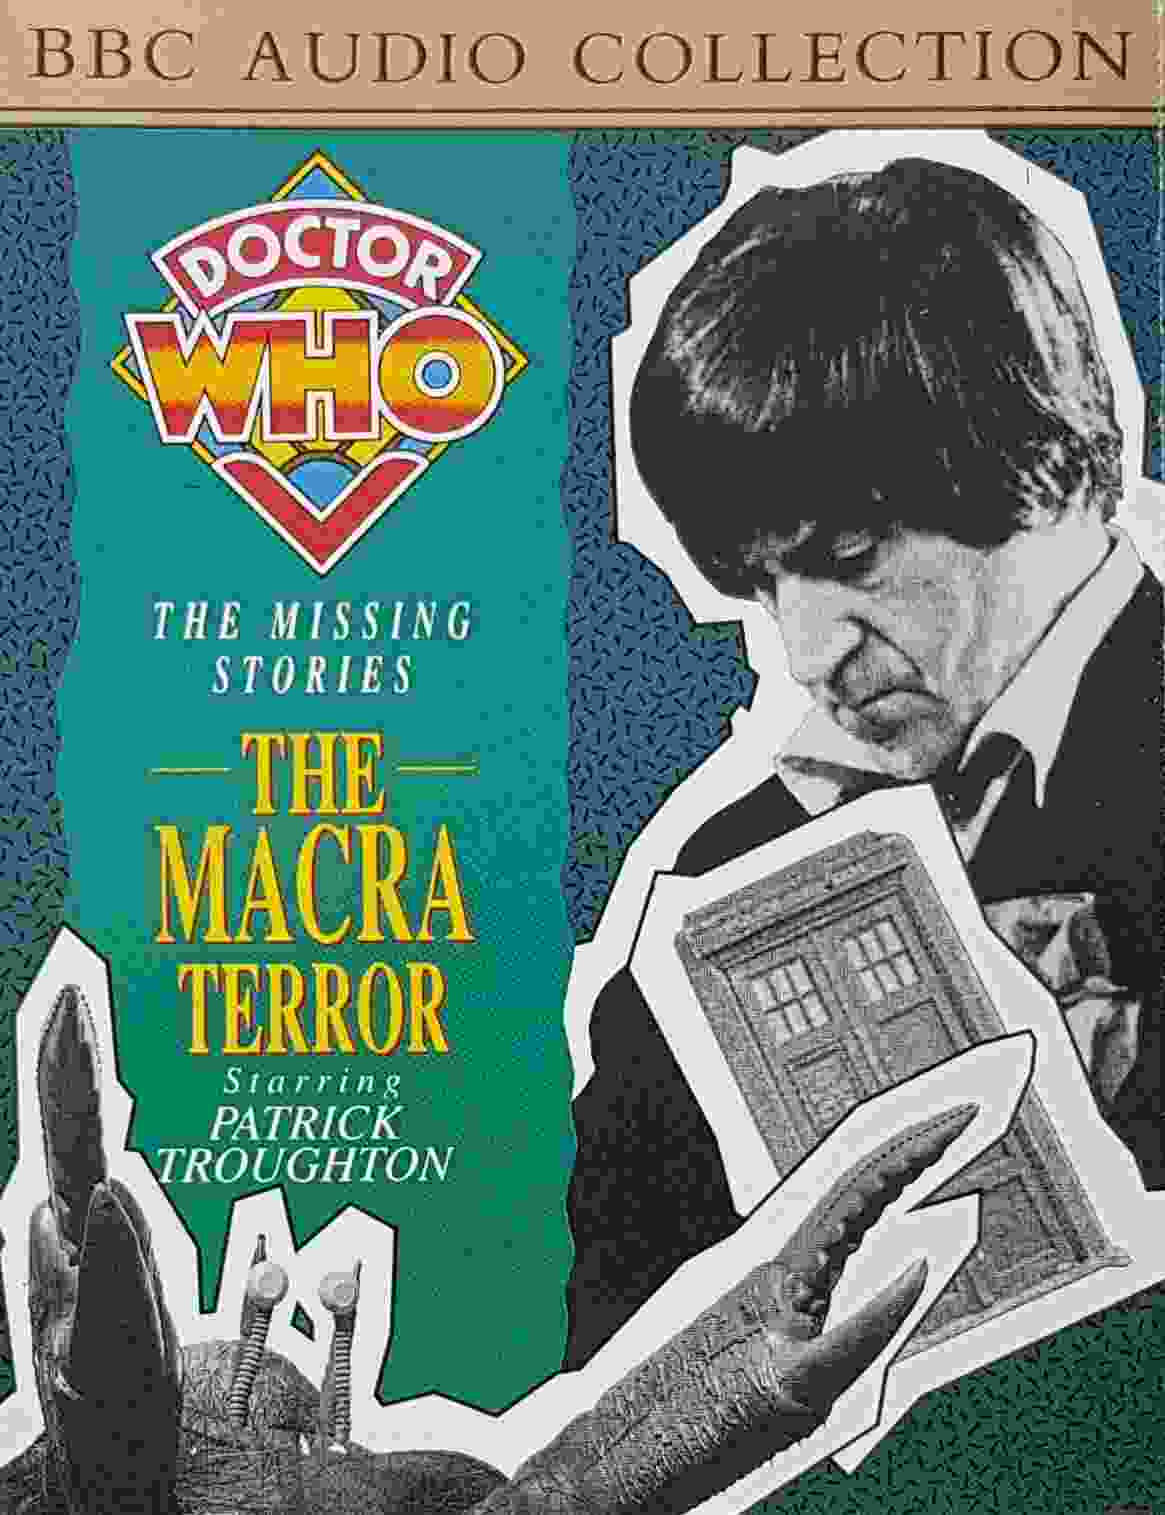 Picture of ZBBC 1342 Doctor Who - The Macra terror by artist Unknown from the BBC cassettes - Records and Tapes library